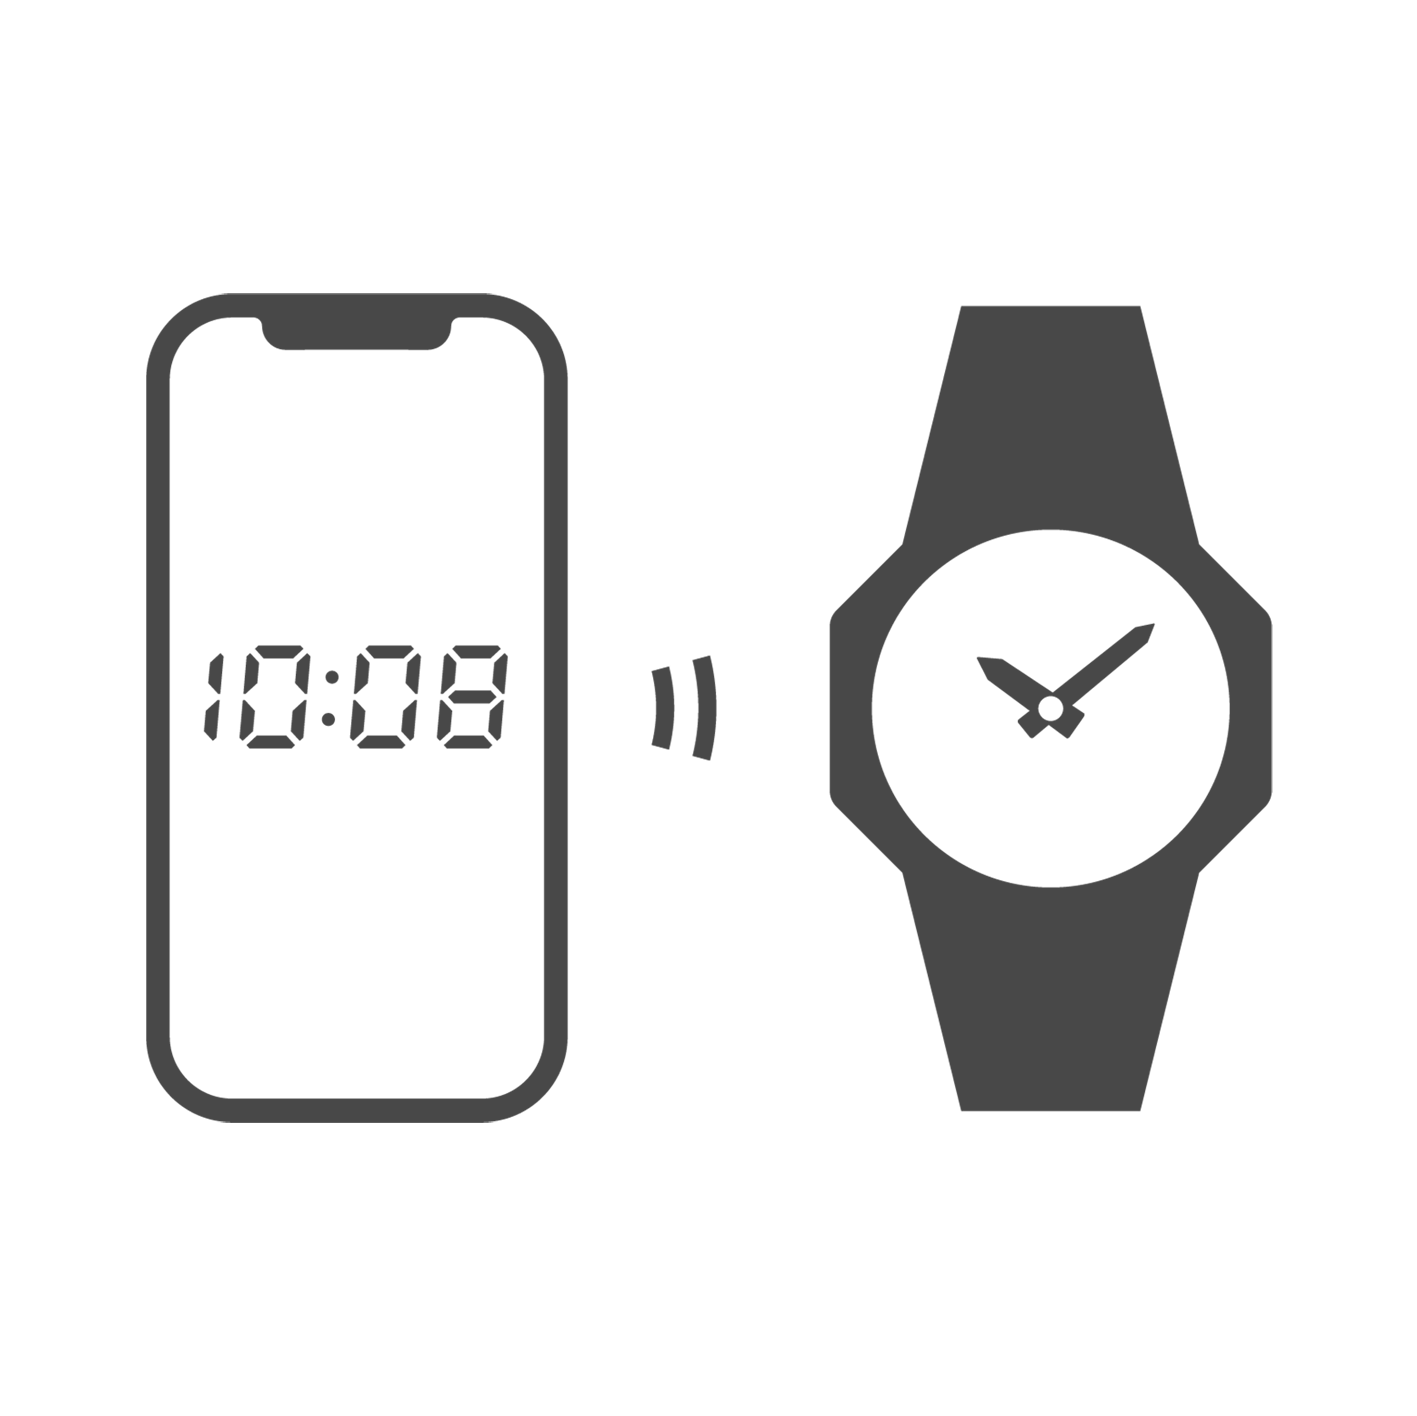 Easy to operate via smartphone watch